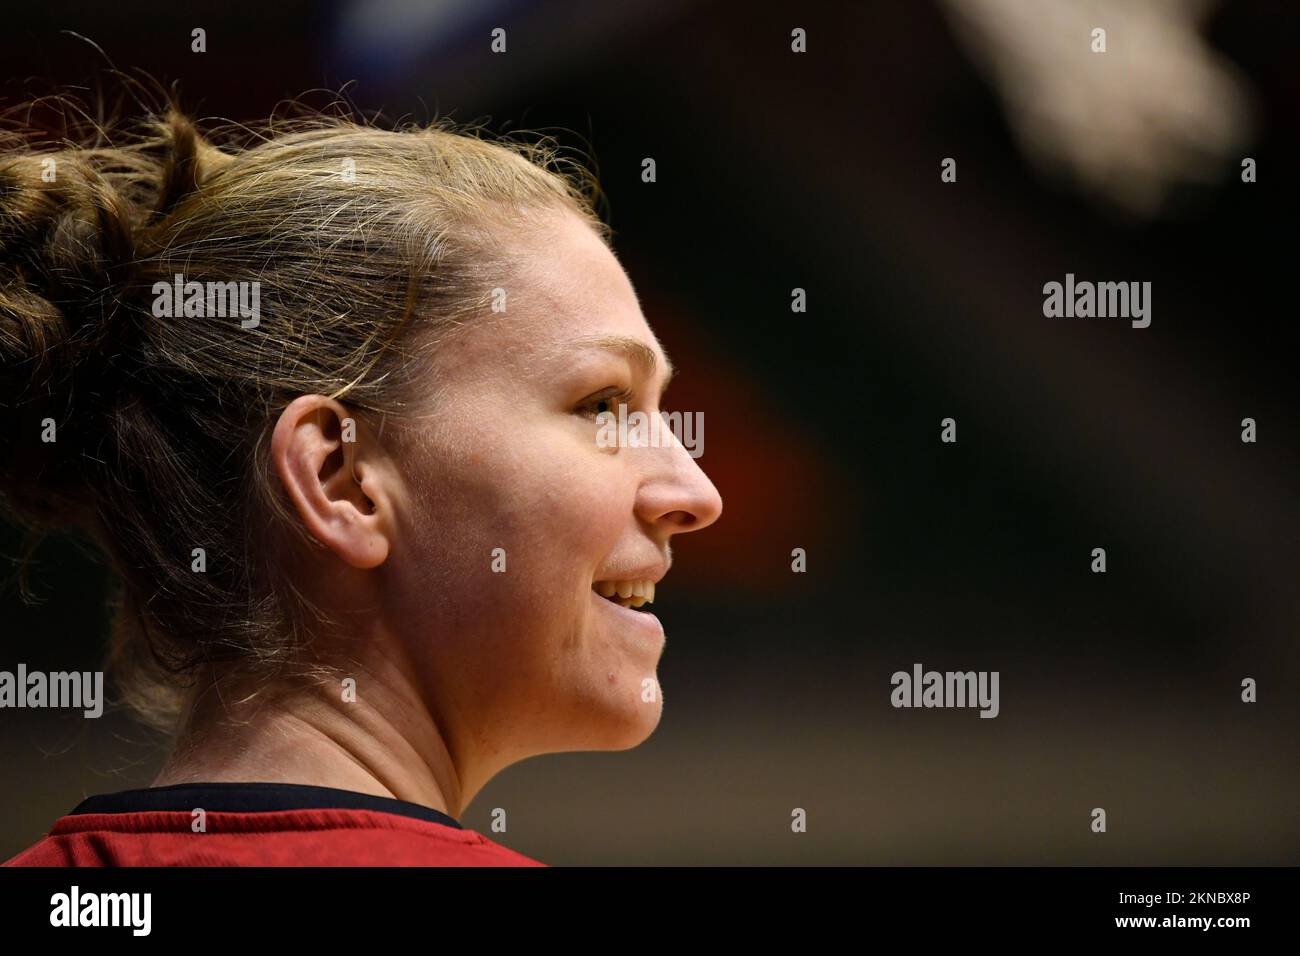 Belgium's Emma Meesseman looks on during a basketball game between Belgium's national team The Belgian Cats and Bosnia-Herzegovina, Sunday 27 November 2022 in Leuven, the fourth game in group A of the qualifications for the 2023 Women's Basketball European championships. BELGA PHOTO JOHN THYS Stock Photo